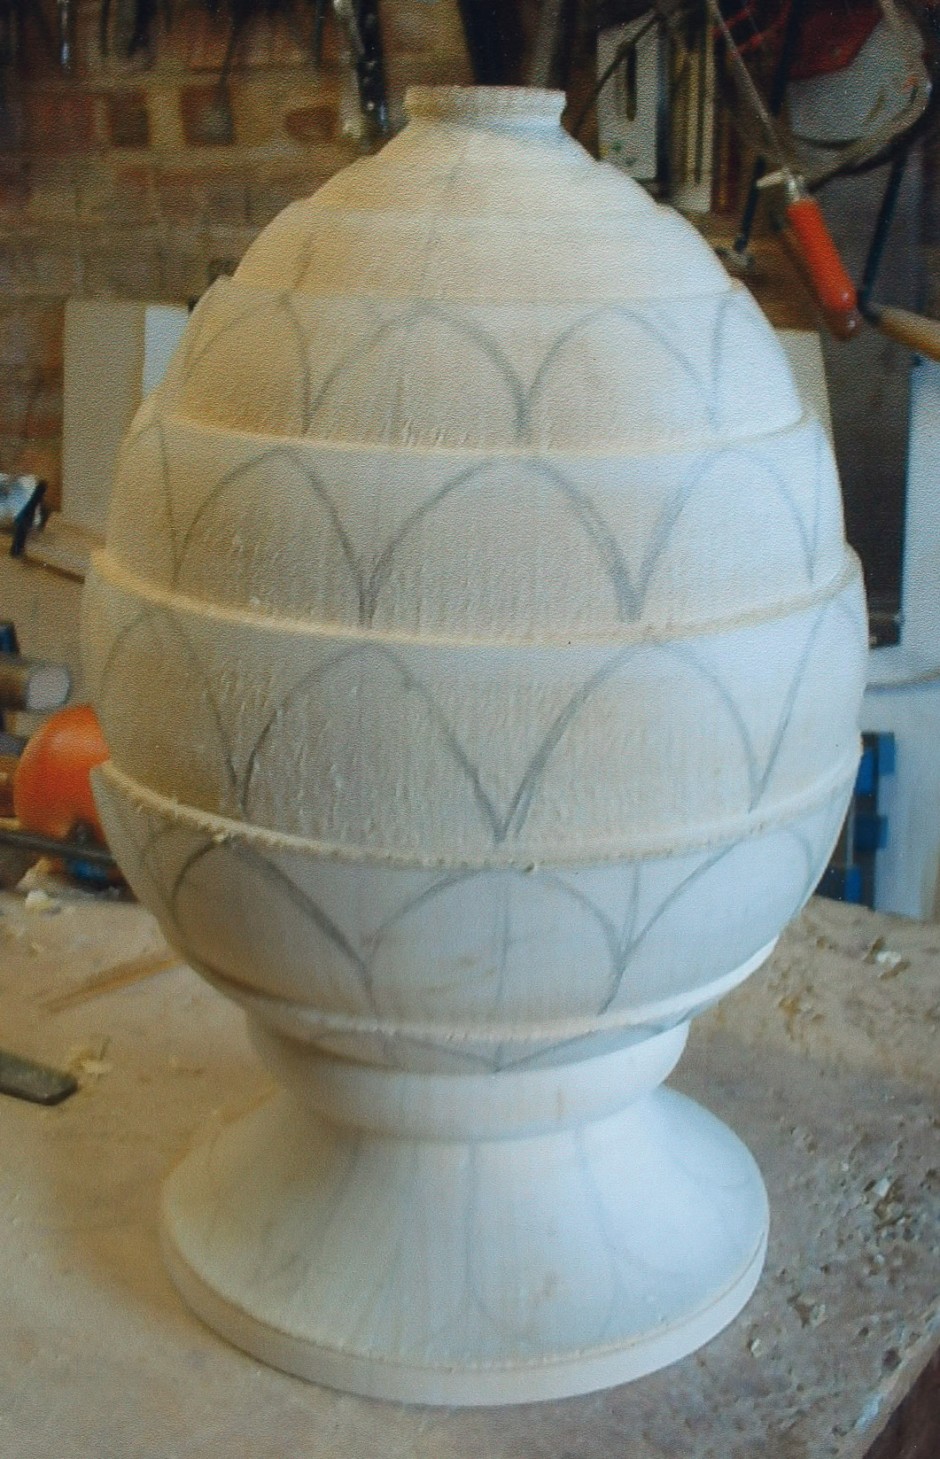 The basic design is sketched on the shaped wood - pineapple design, wood shape, sketching, ornament, casting for stone